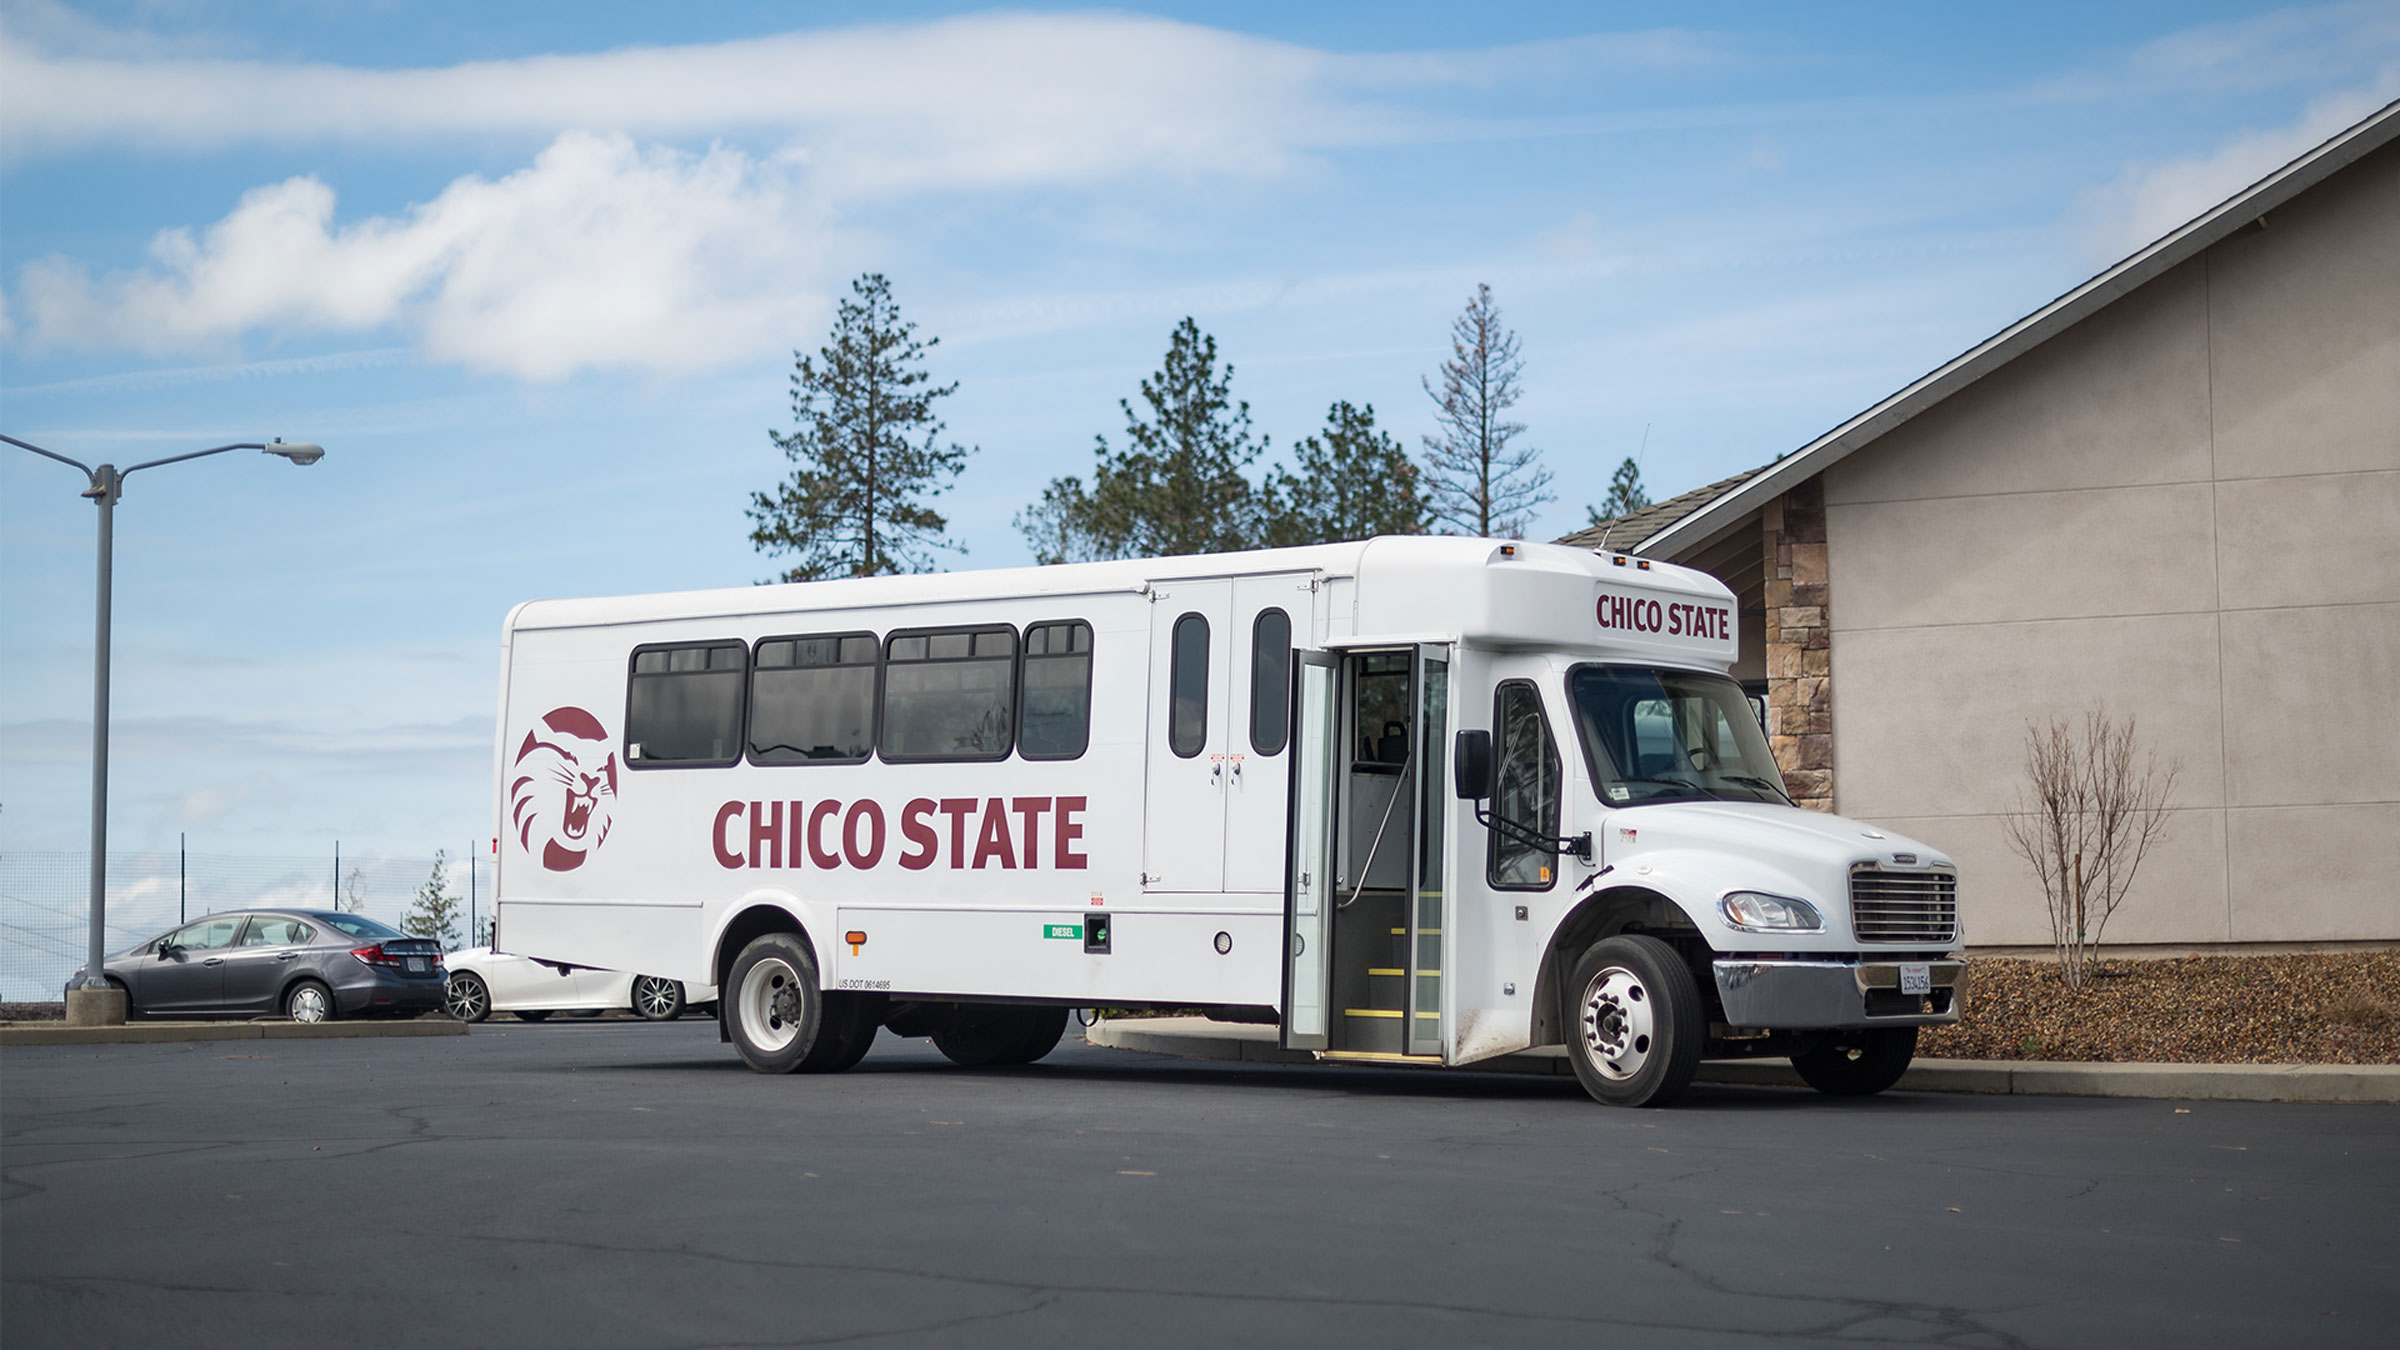 A white bus is parked with its door open; it has Chico State written on the side and the Wildcat logo printed on it